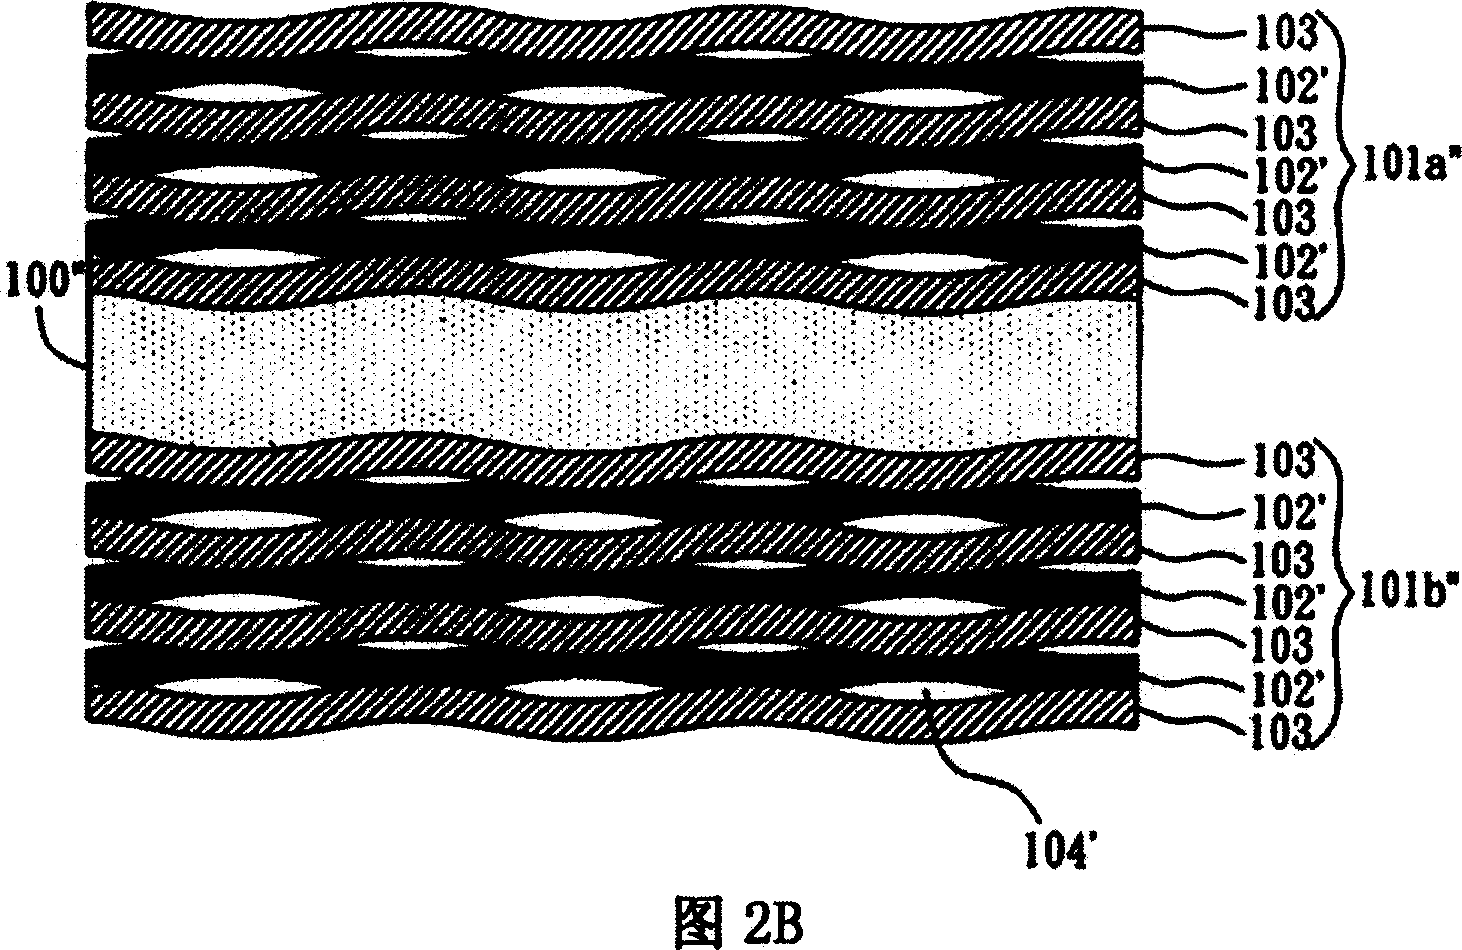 Electro-acoustic actuator and method for manufacture